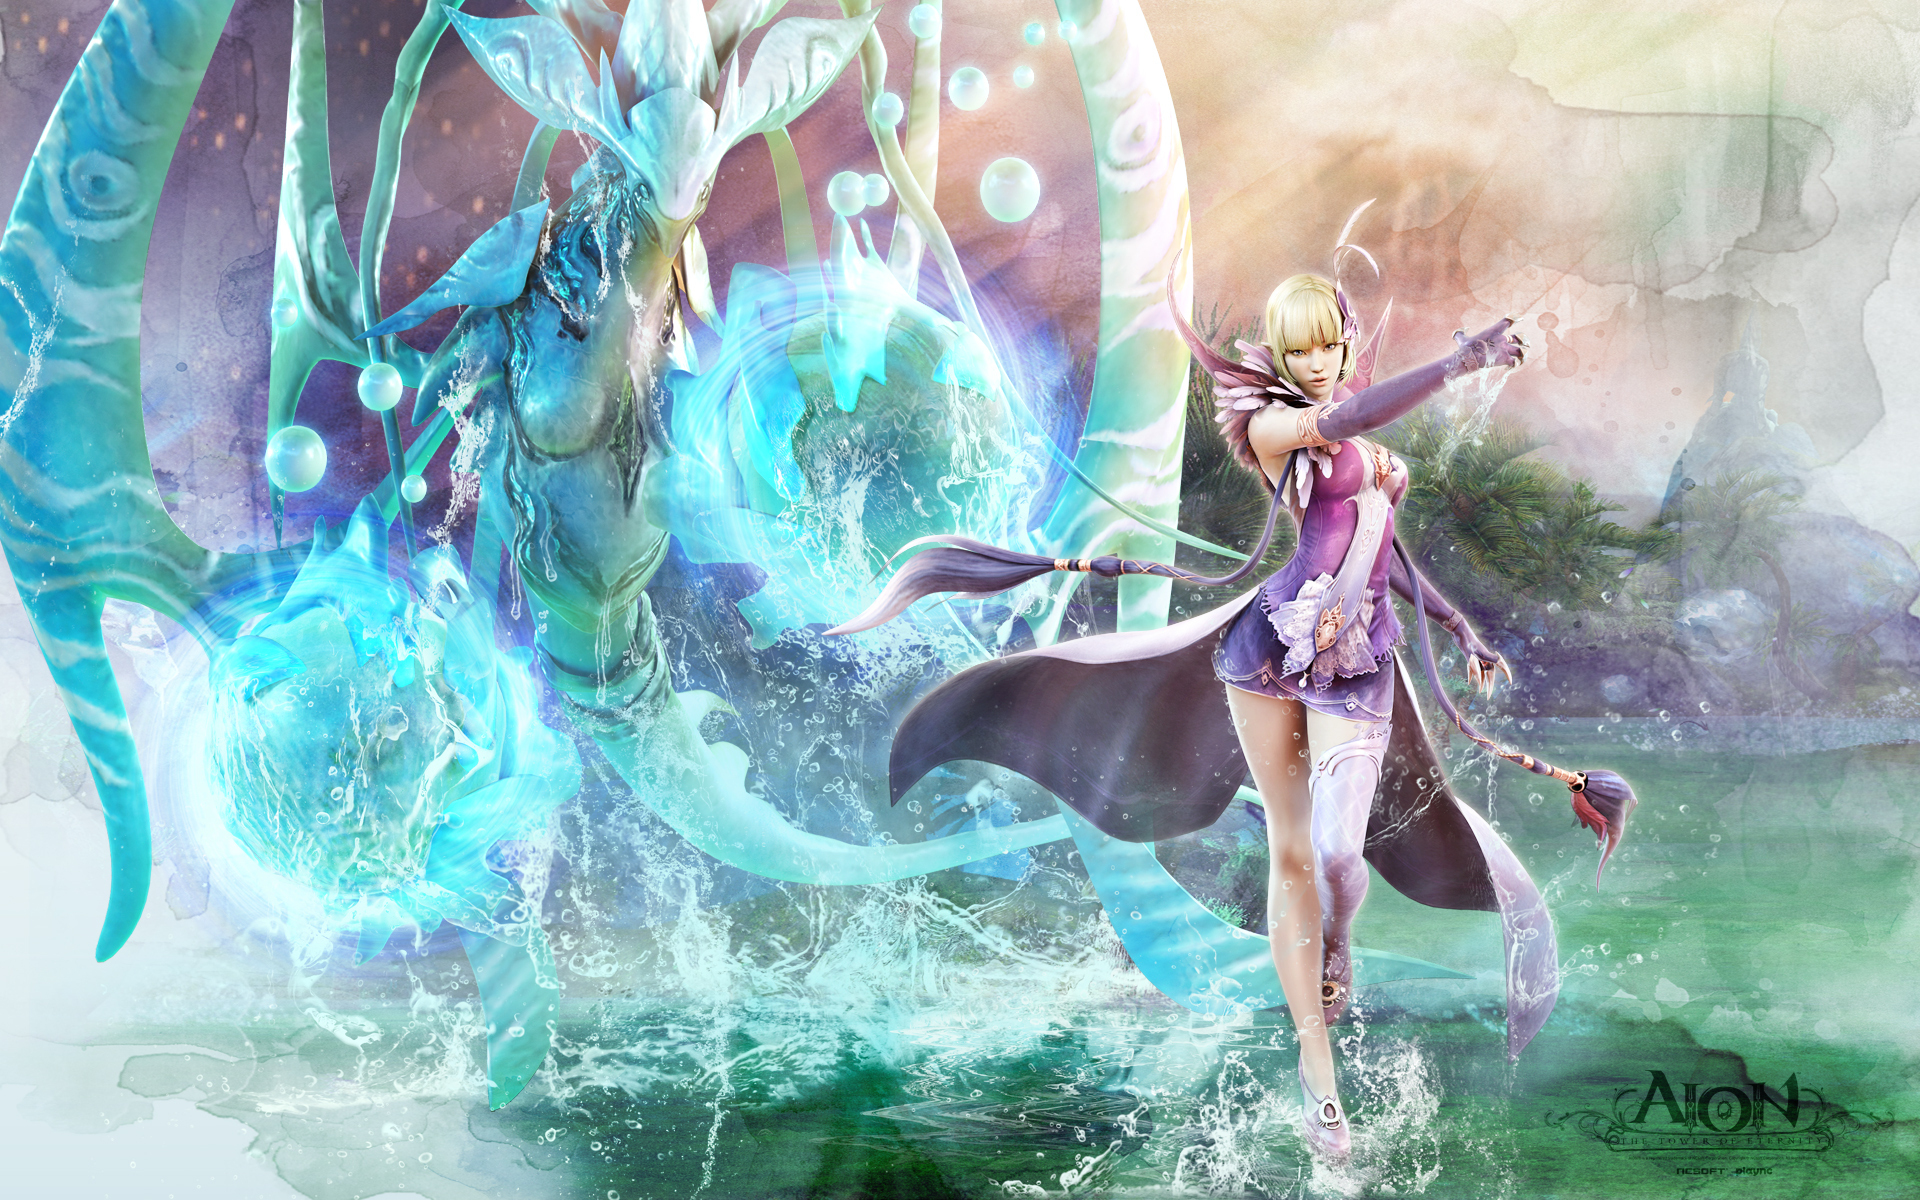 Video Game Aion 1920x1200